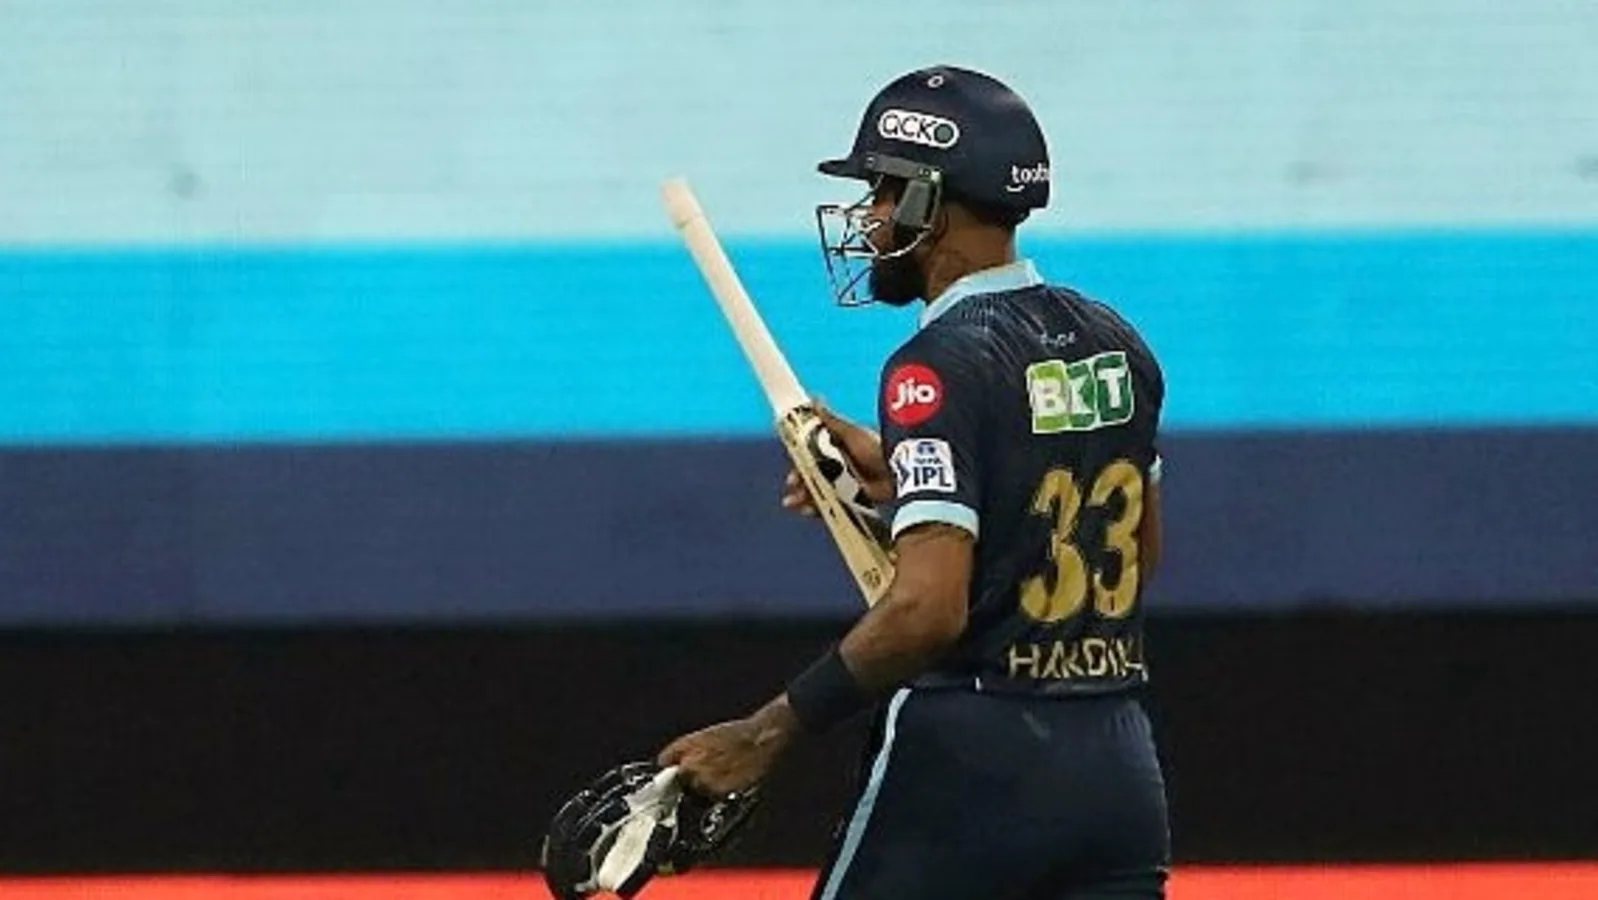 IPL 2022: With an all-round show, skipper Hardik Pandya starts on a bright note